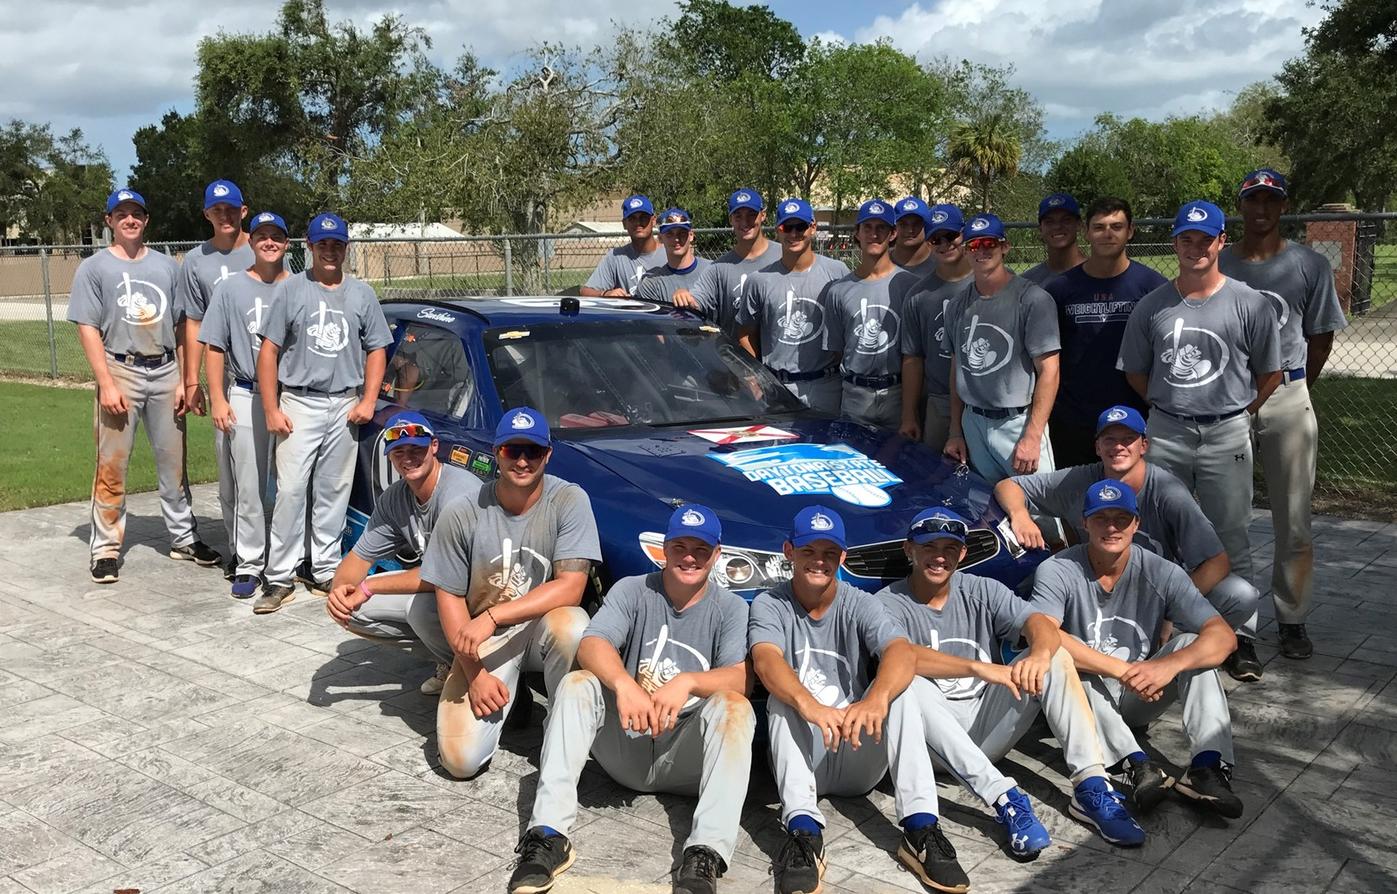 The Daytona State Baseball team gathers around the race car provided by Visit Florida Racing